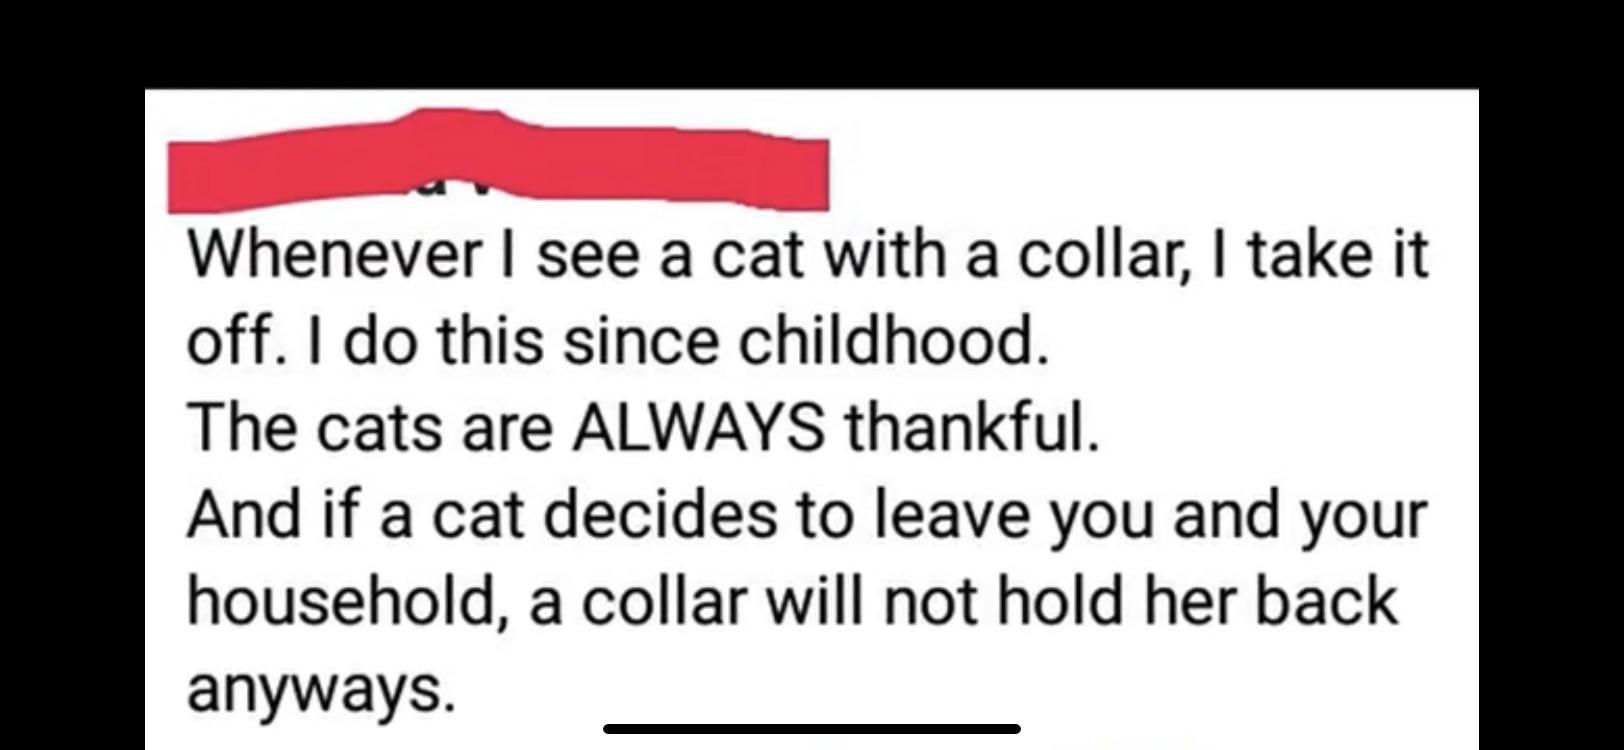 Whenever I see a cat with a collar, I take it off. I do this since childhood. The cats are Always thankful. And if a cat decides to leave you and your household, a collar will not hold her back anyways.